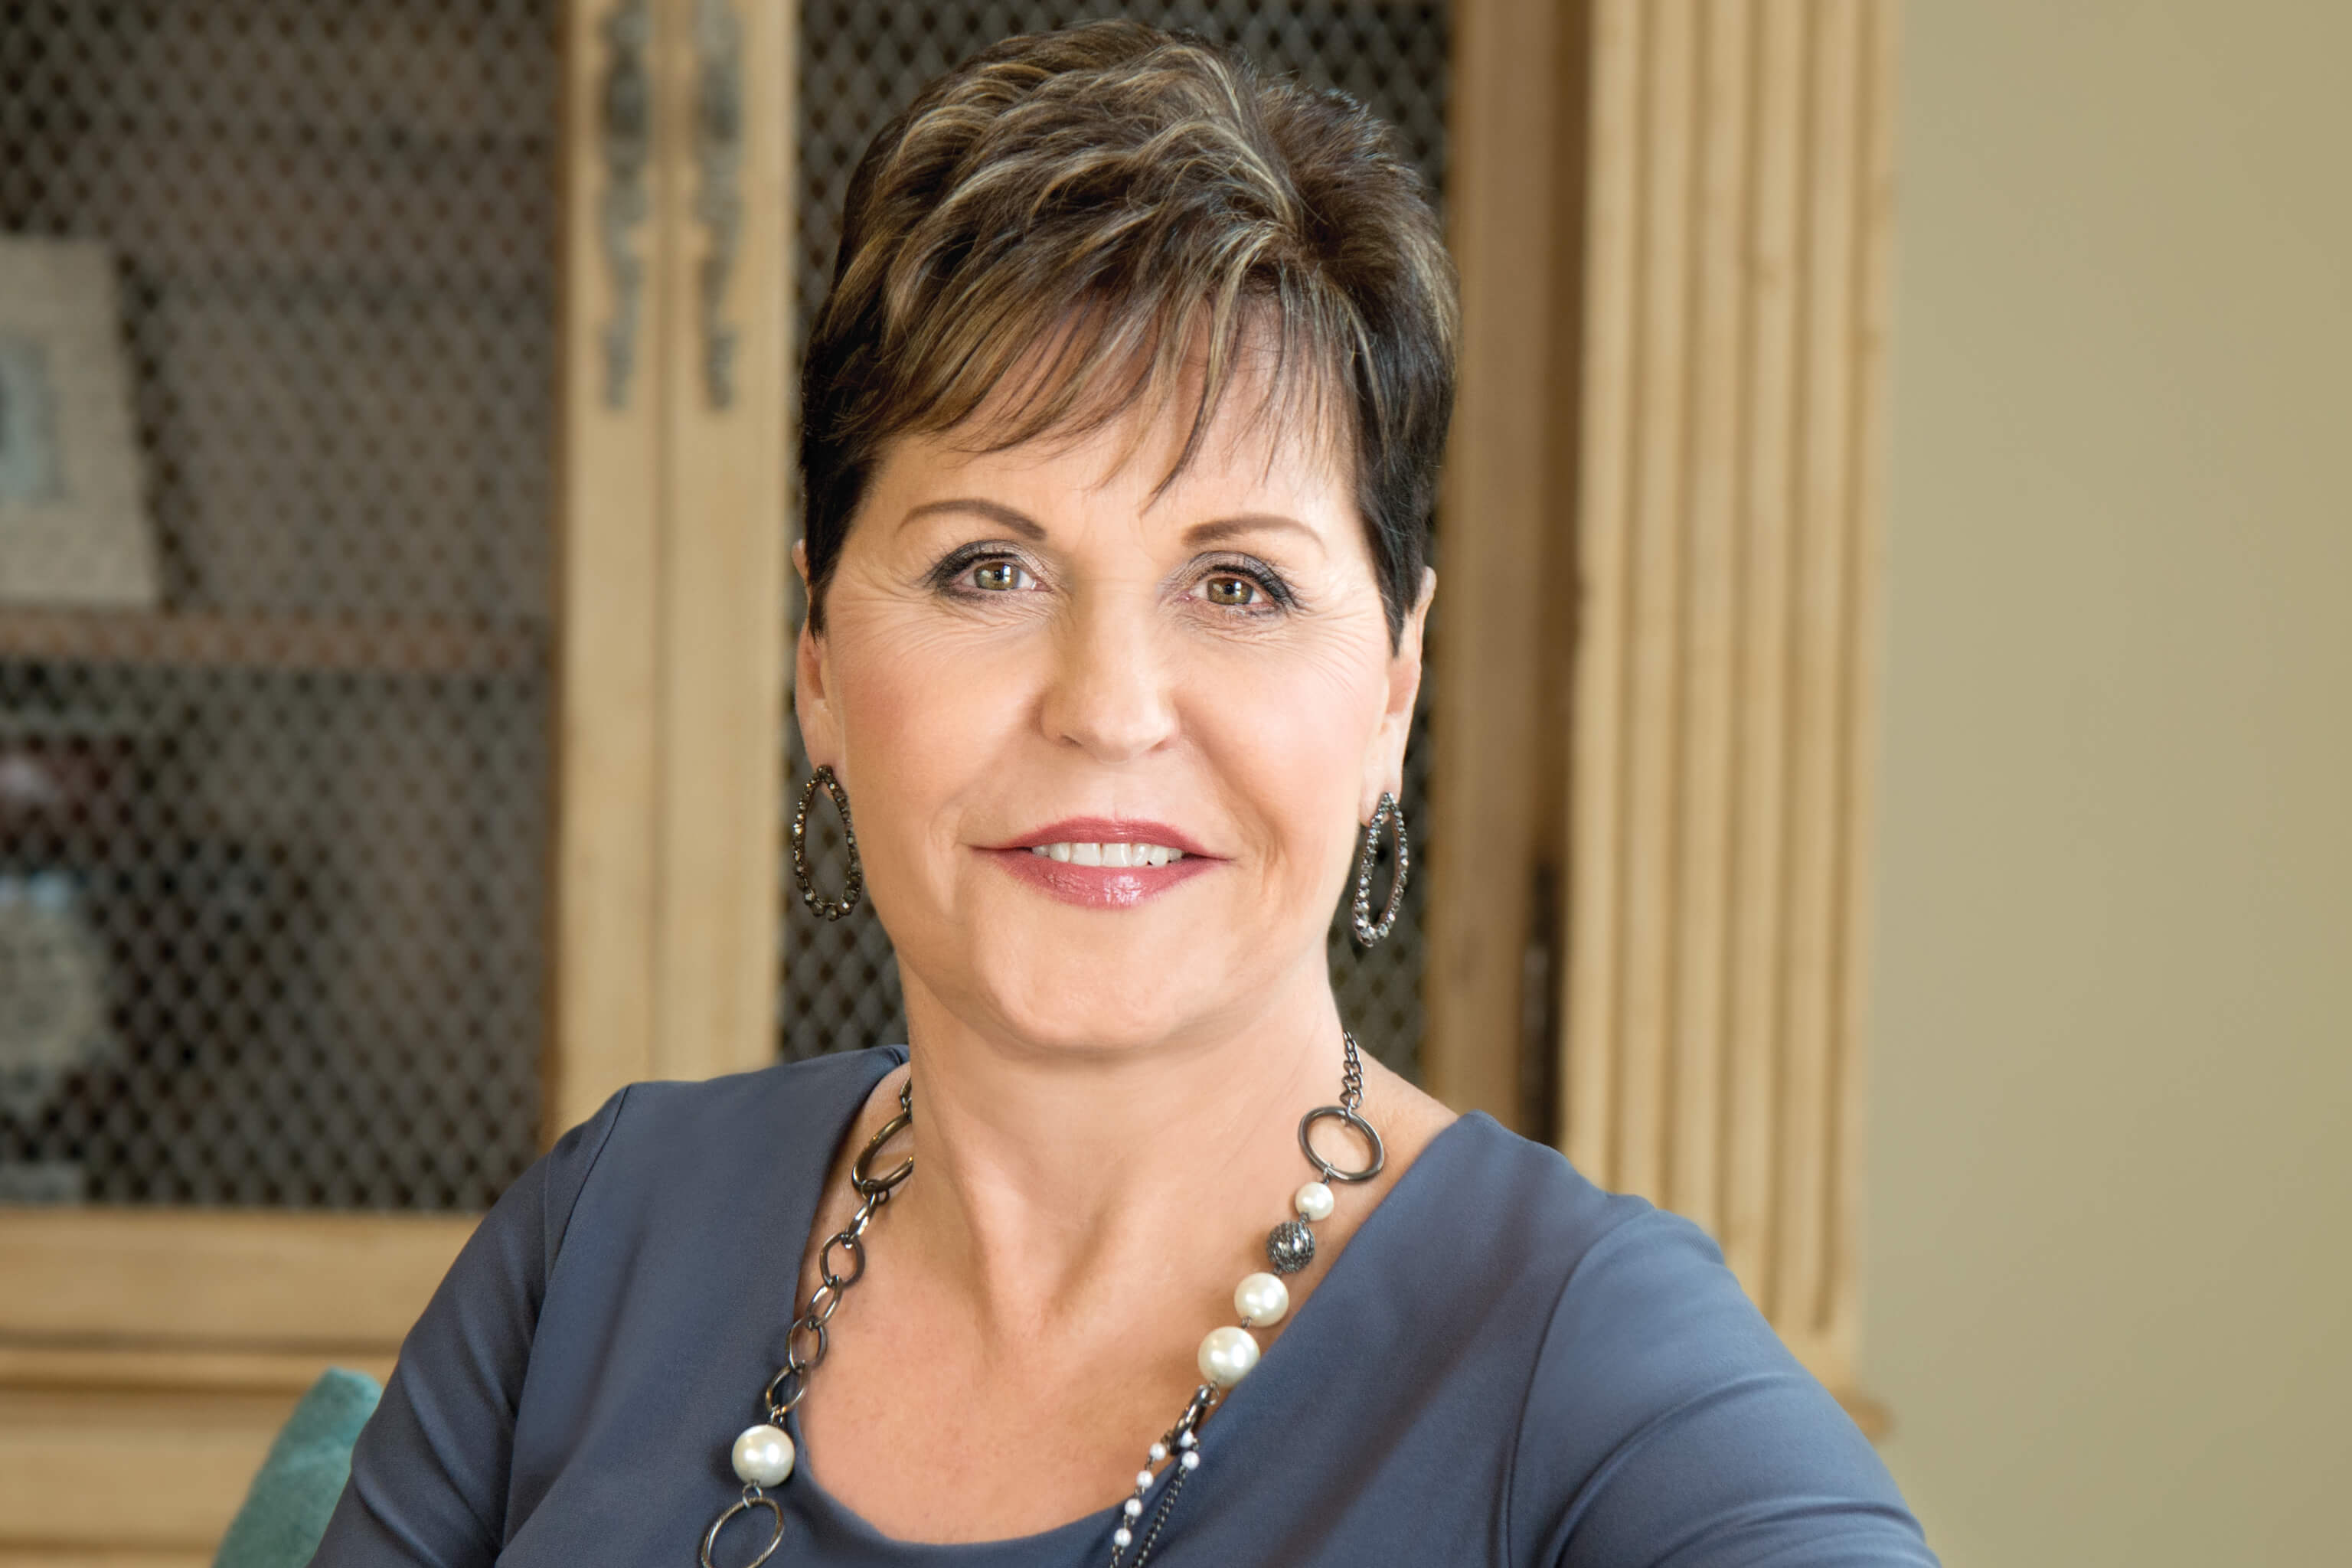 Joyce Meyer in a blue shirt wearing a necklace and earrings